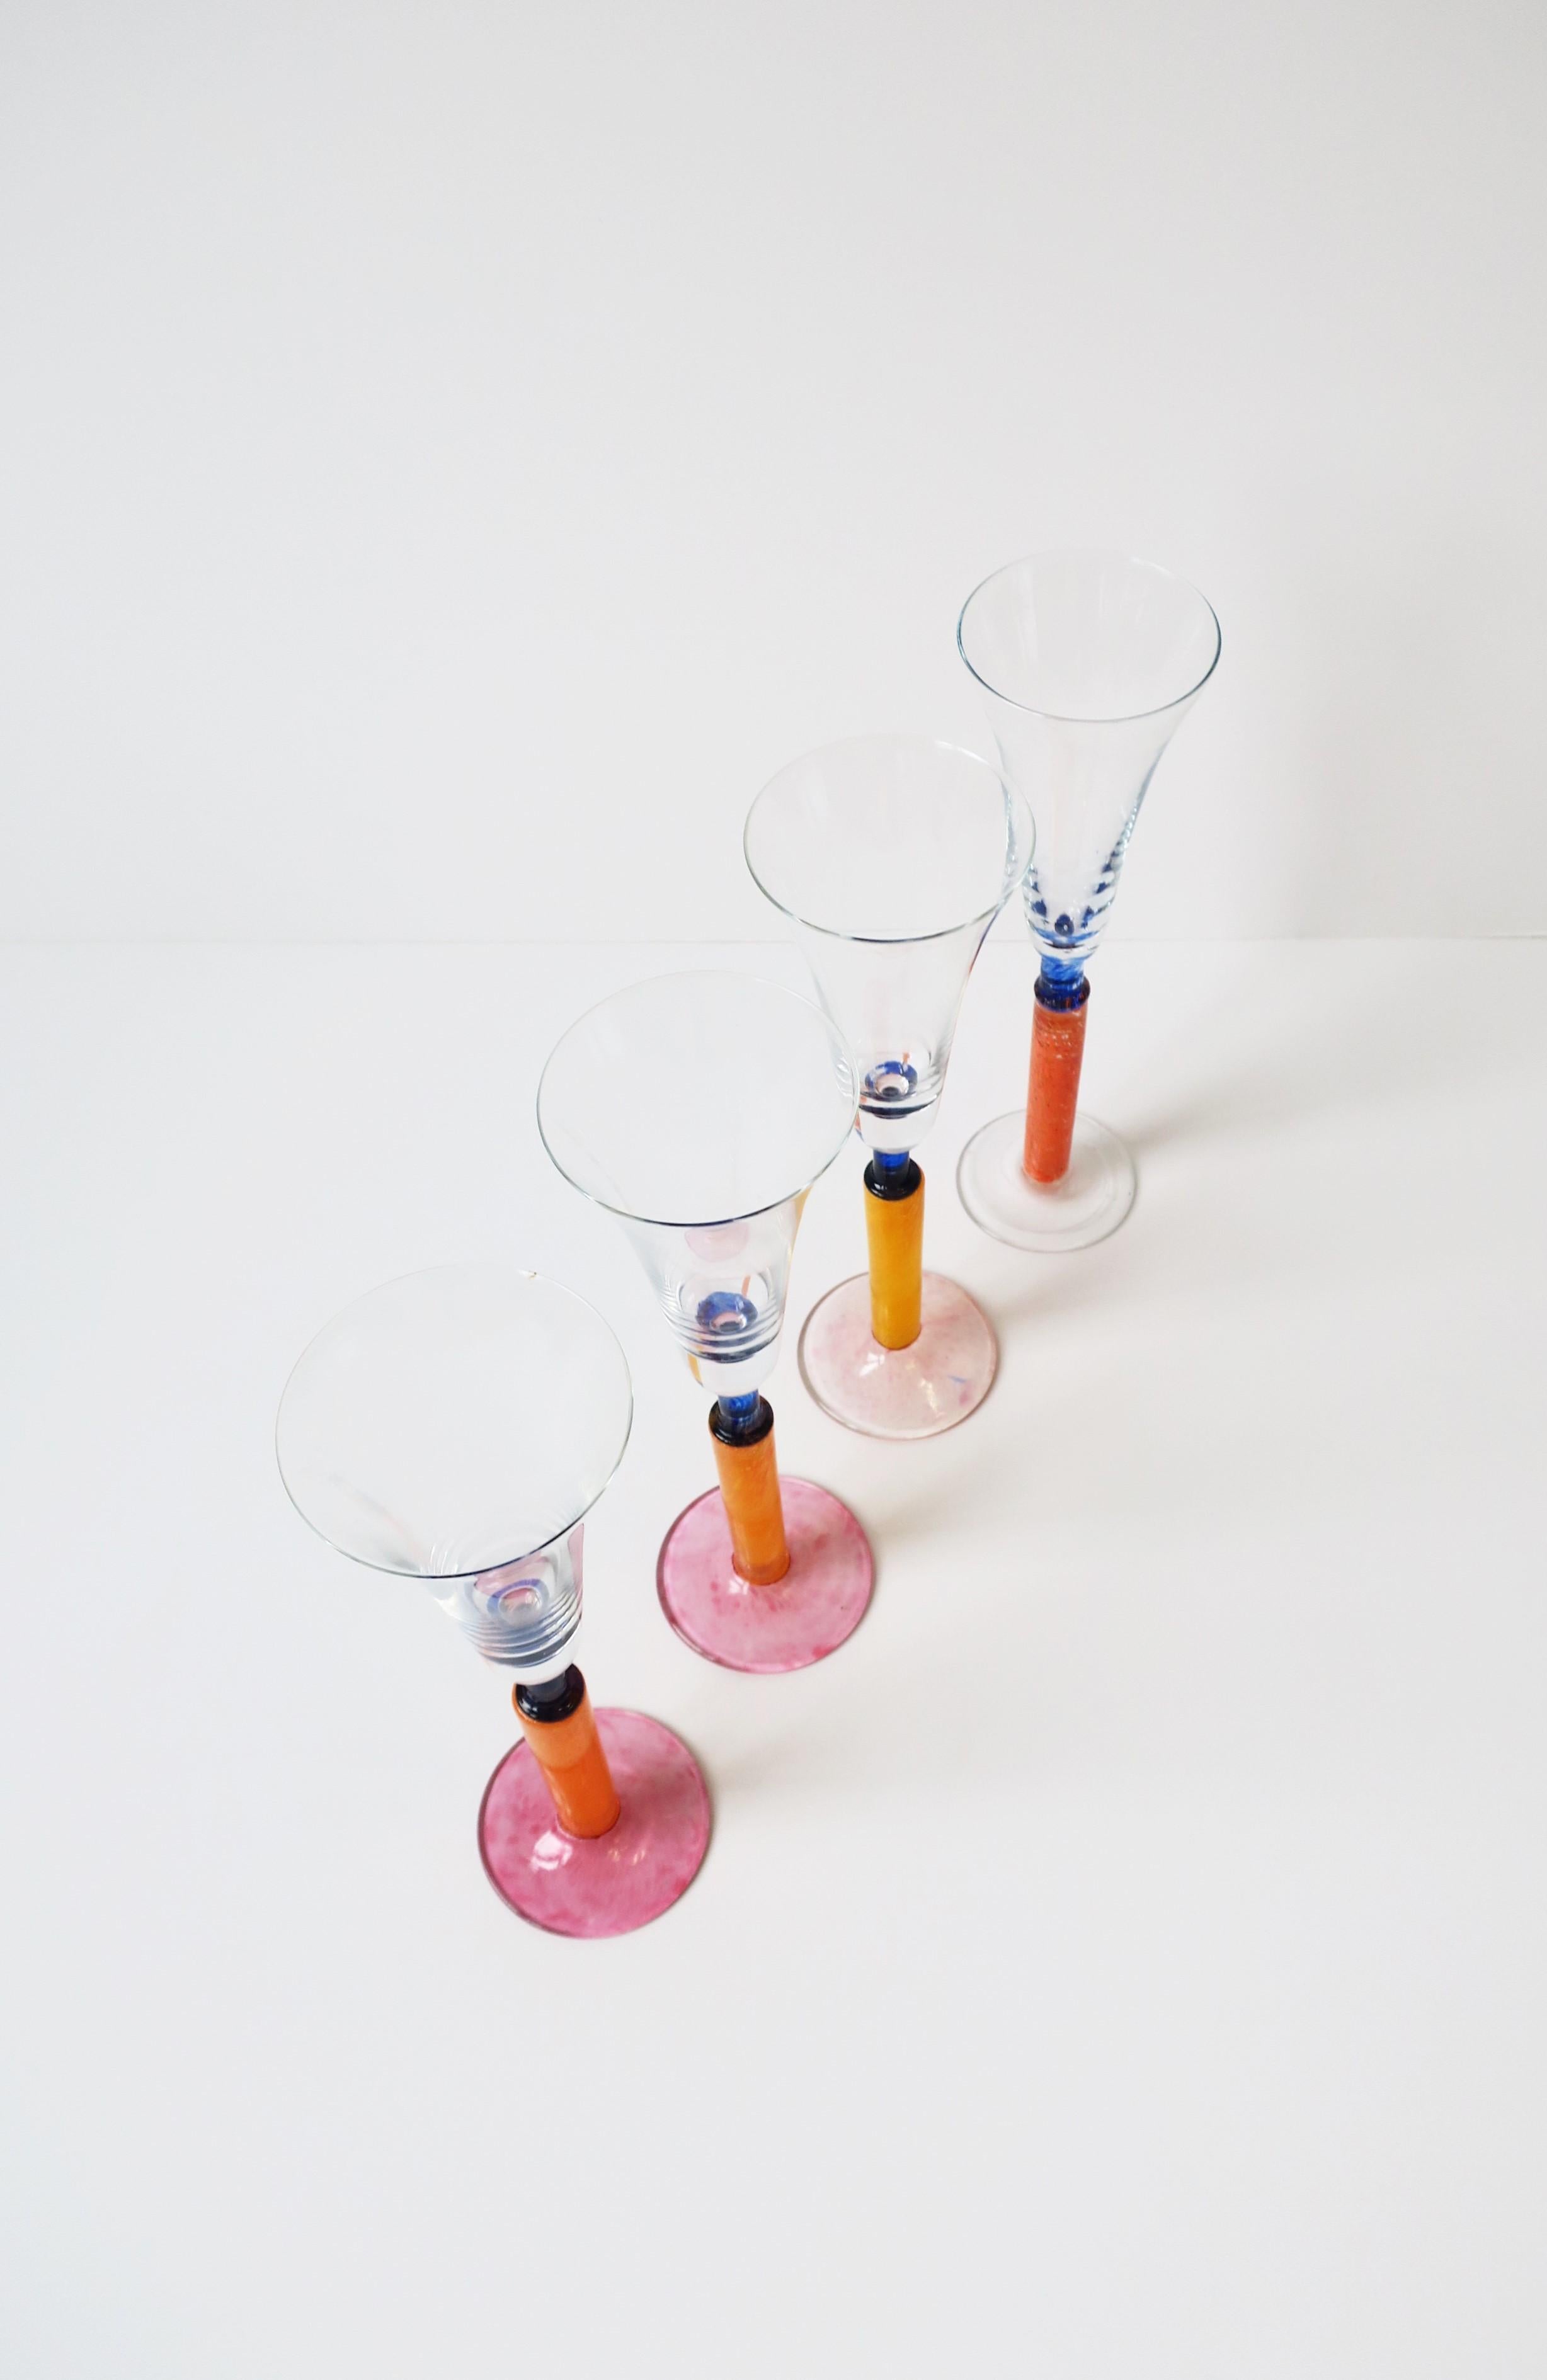 Orange Art Glass Champagne Flutes Glasses Postmodern 1990s In Good Condition For Sale In New York, NY